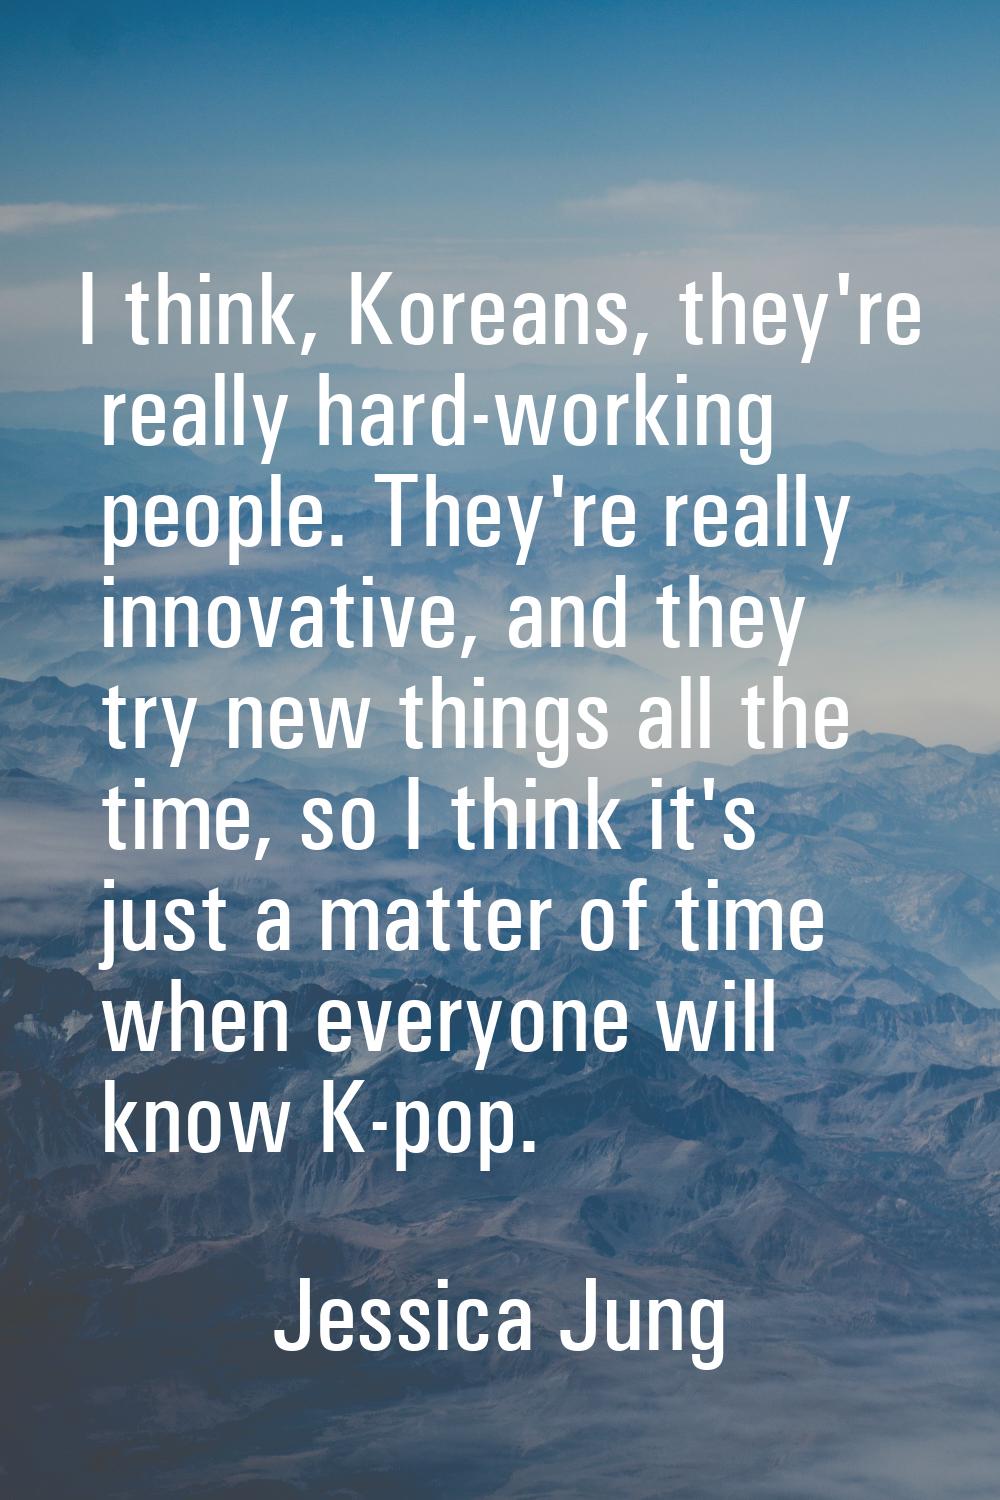 I think, Koreans, they're really hard-working people. They're really innovative, and they try new t